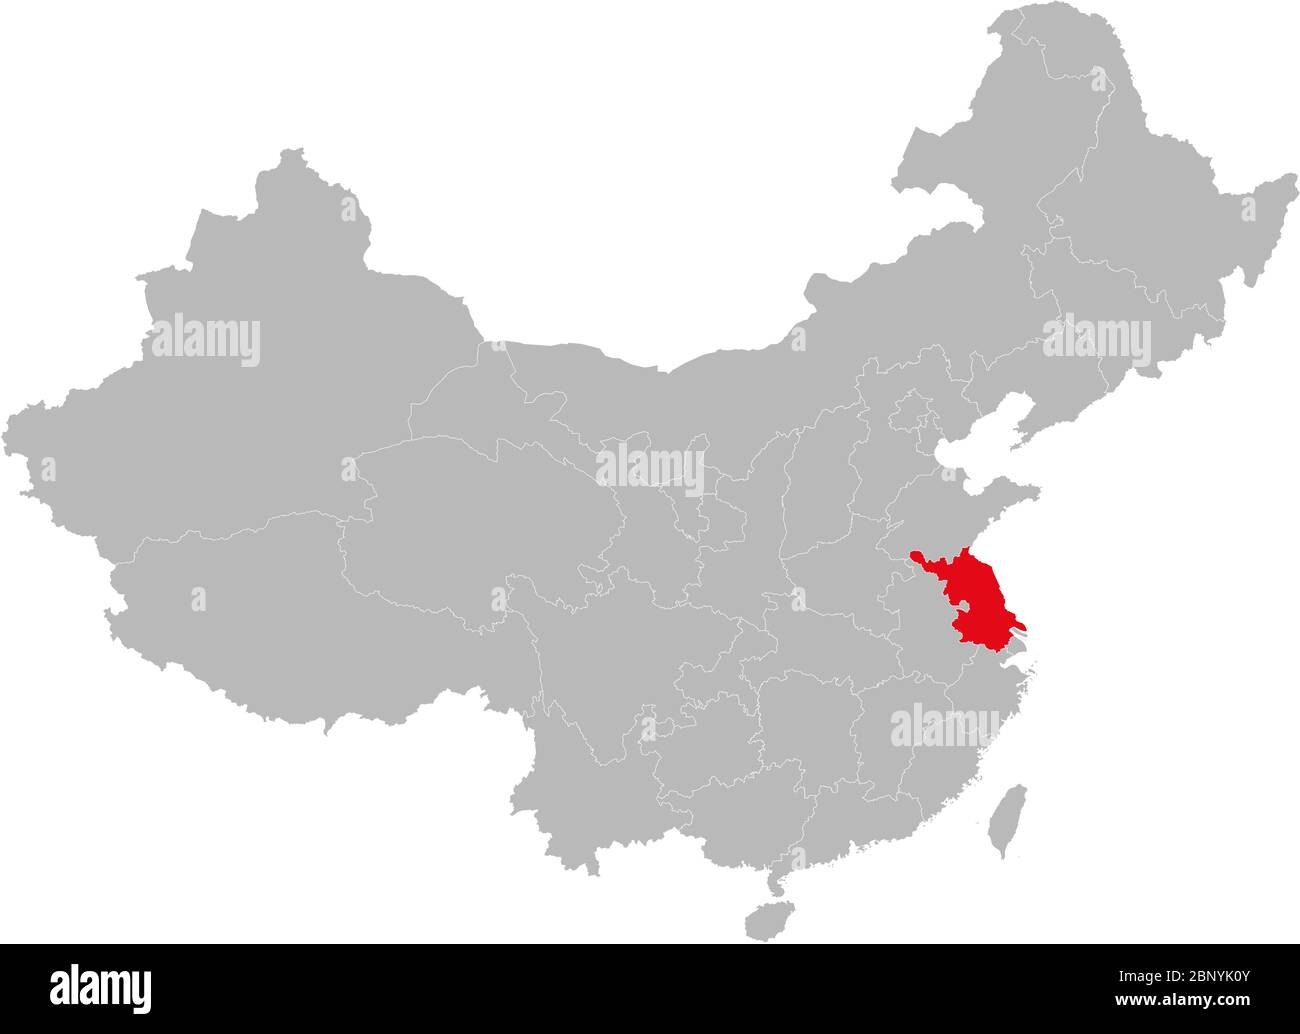 Jiangsu province location on china map. Gray background. Asian country. Stock Vector